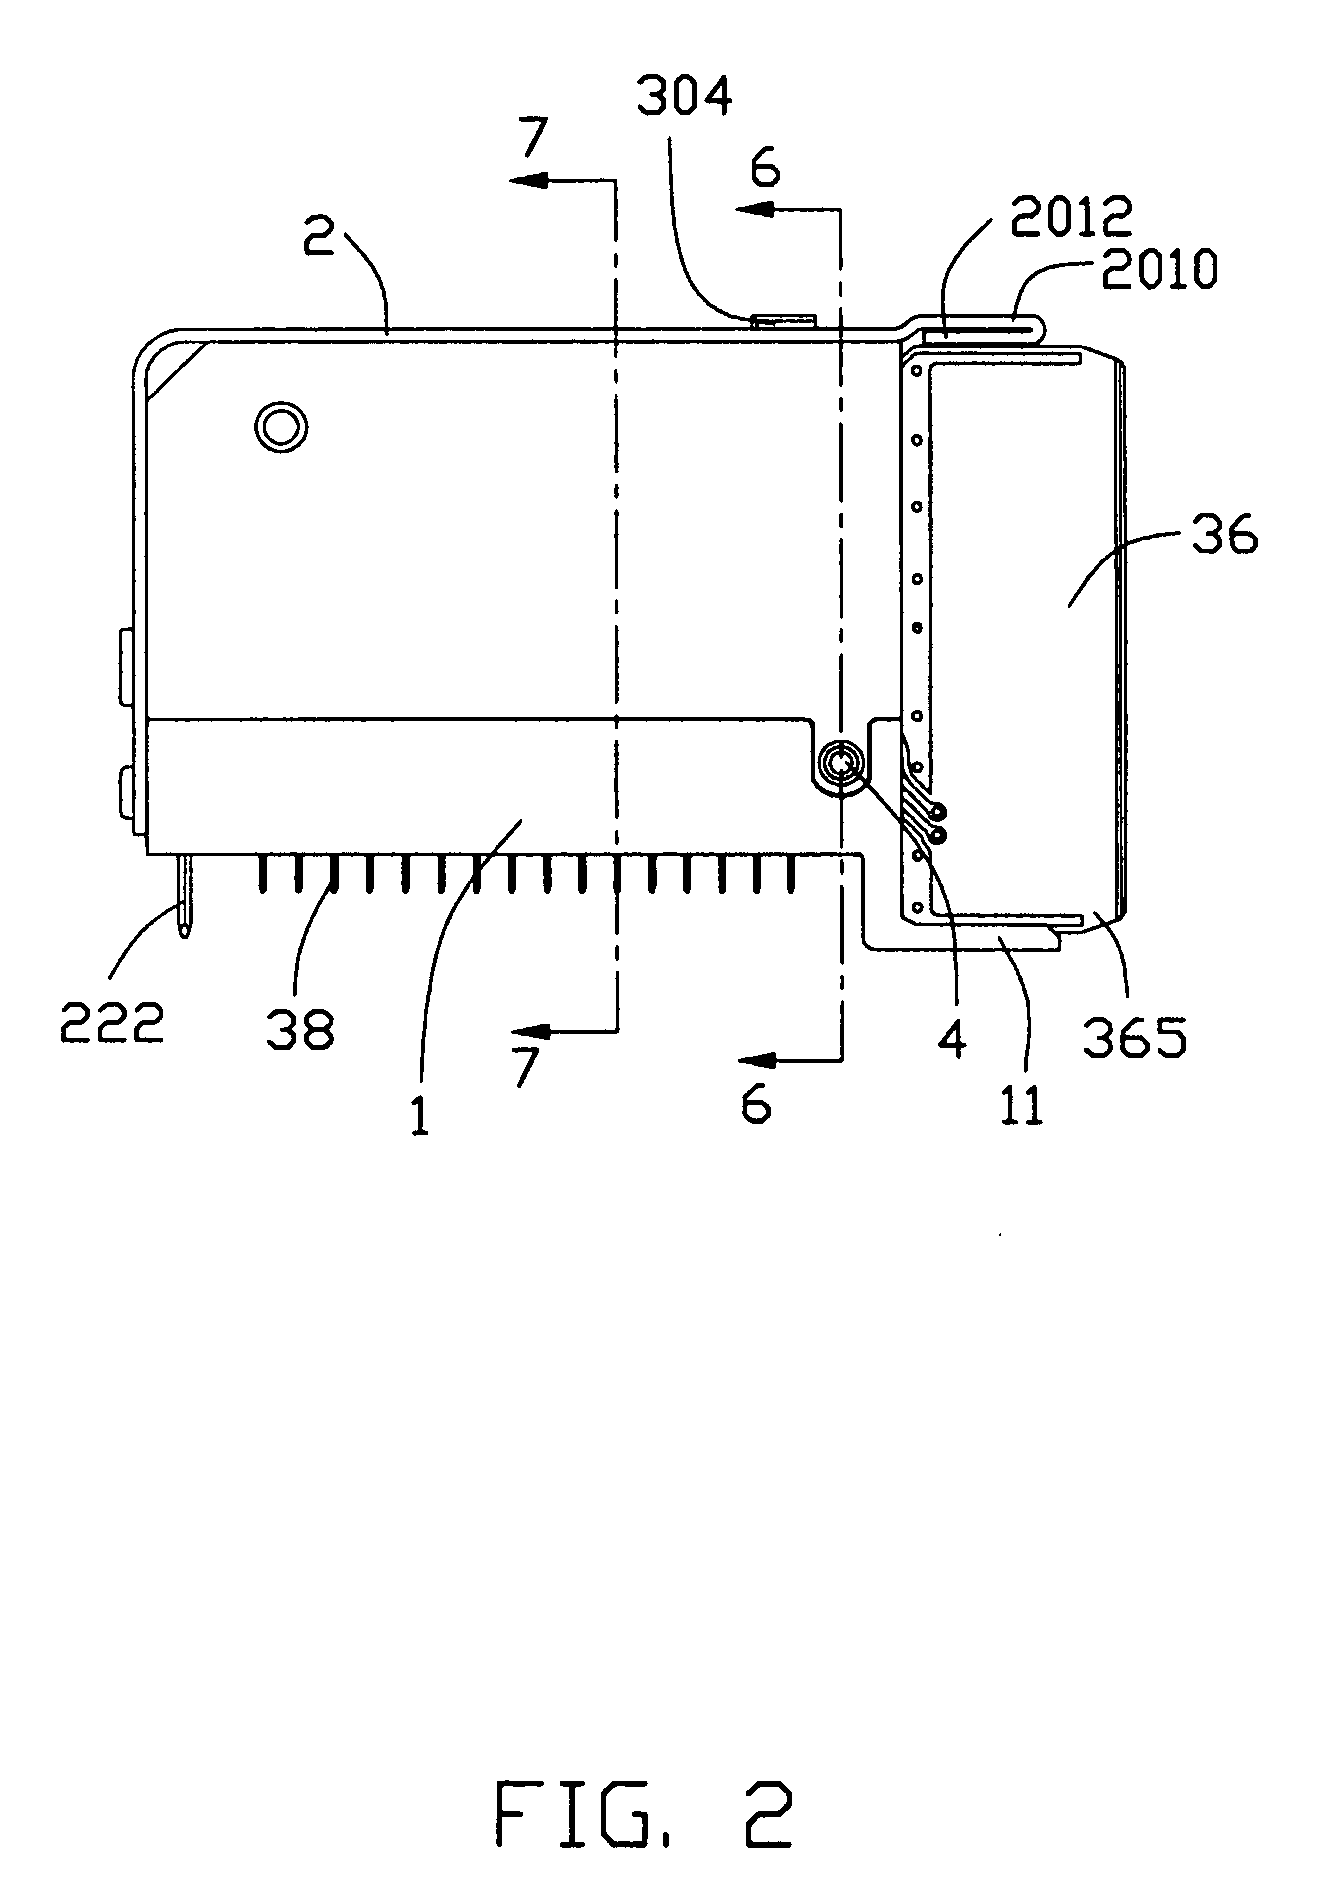 Electrical connector having circuit board modules positioned between metal stiffener and a housing